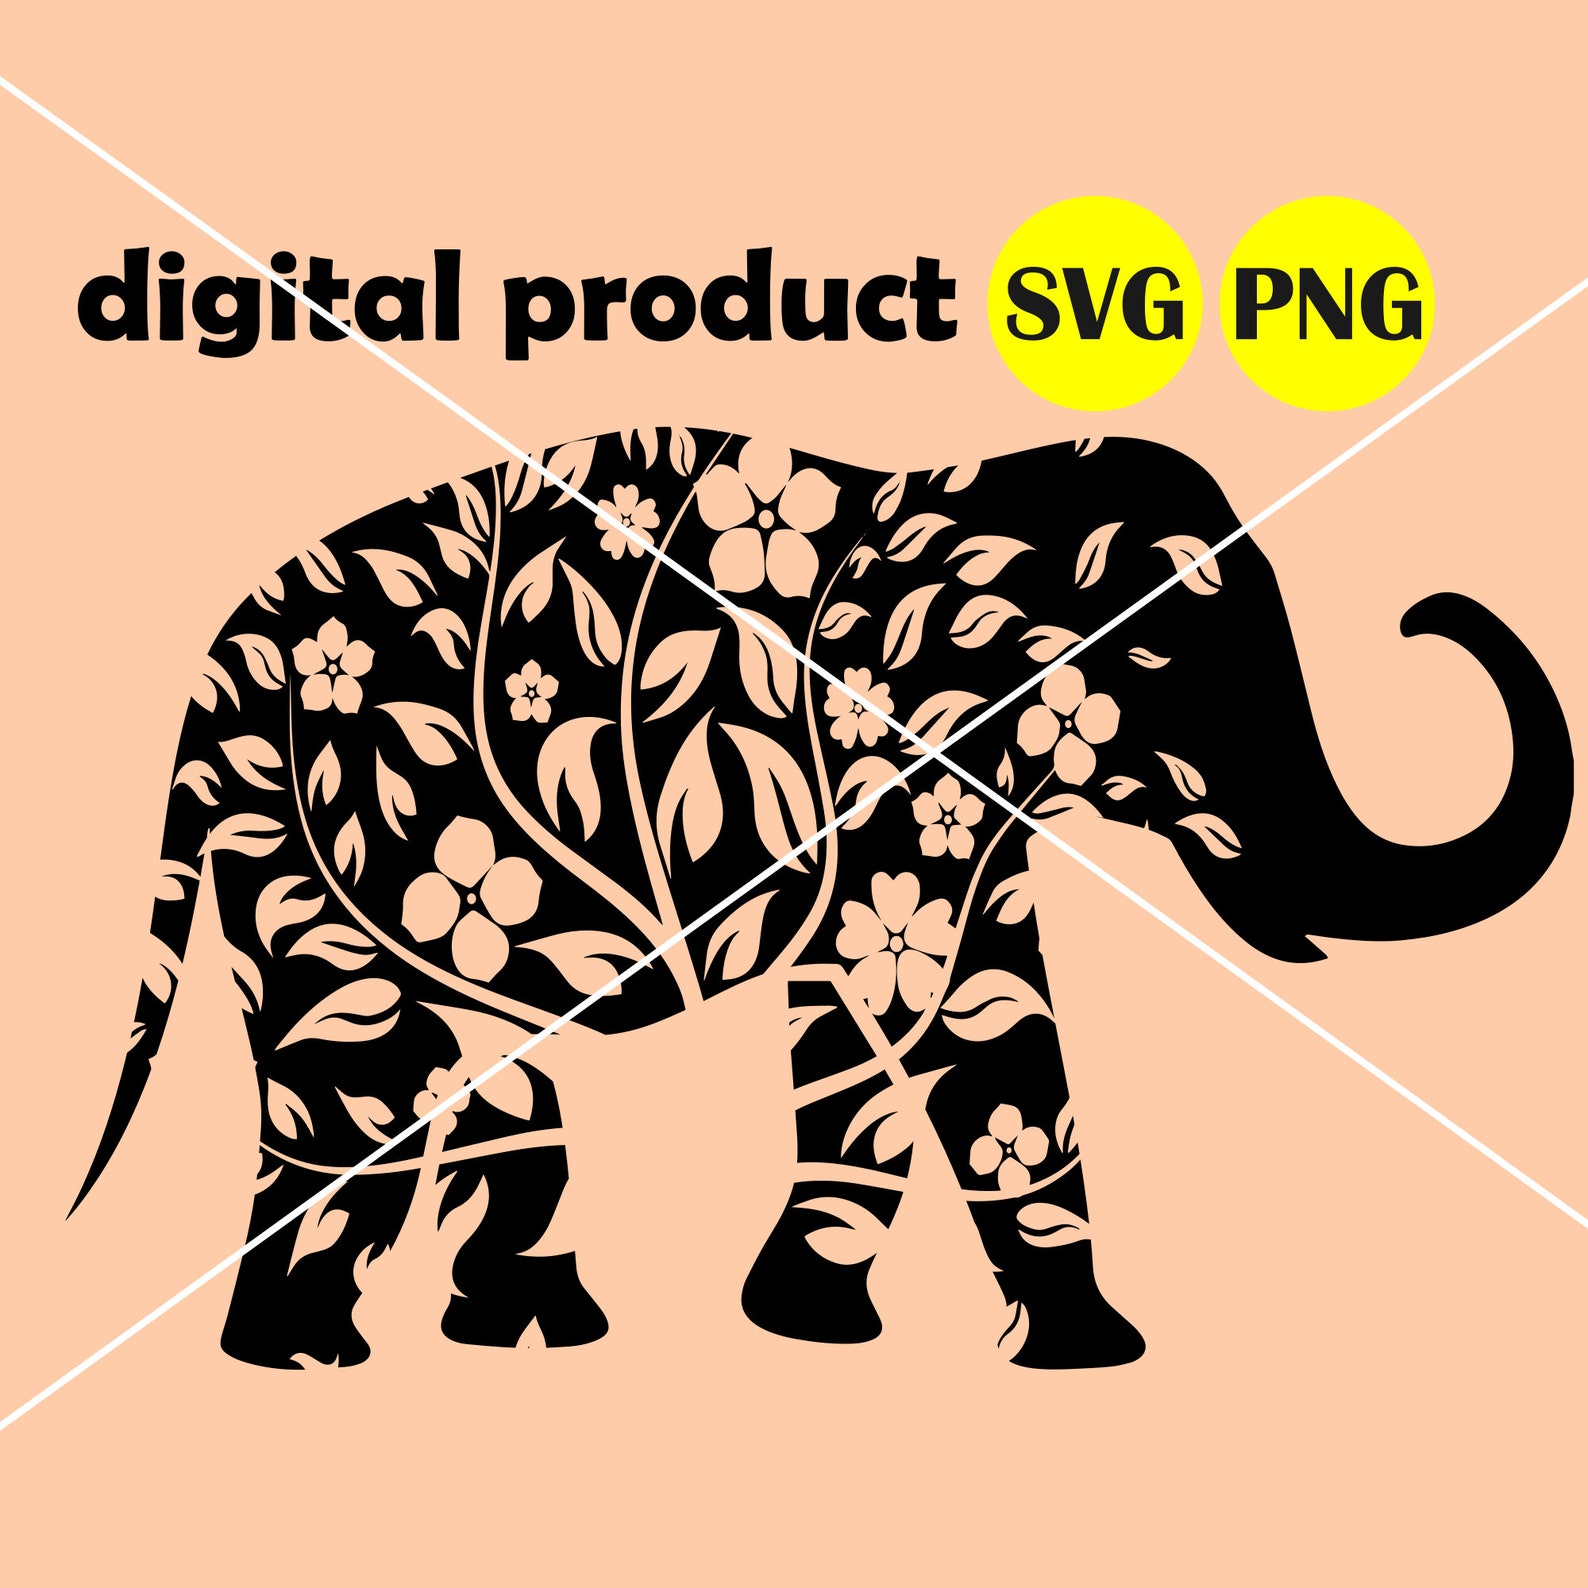 This clipart is perfect for printed paper products.